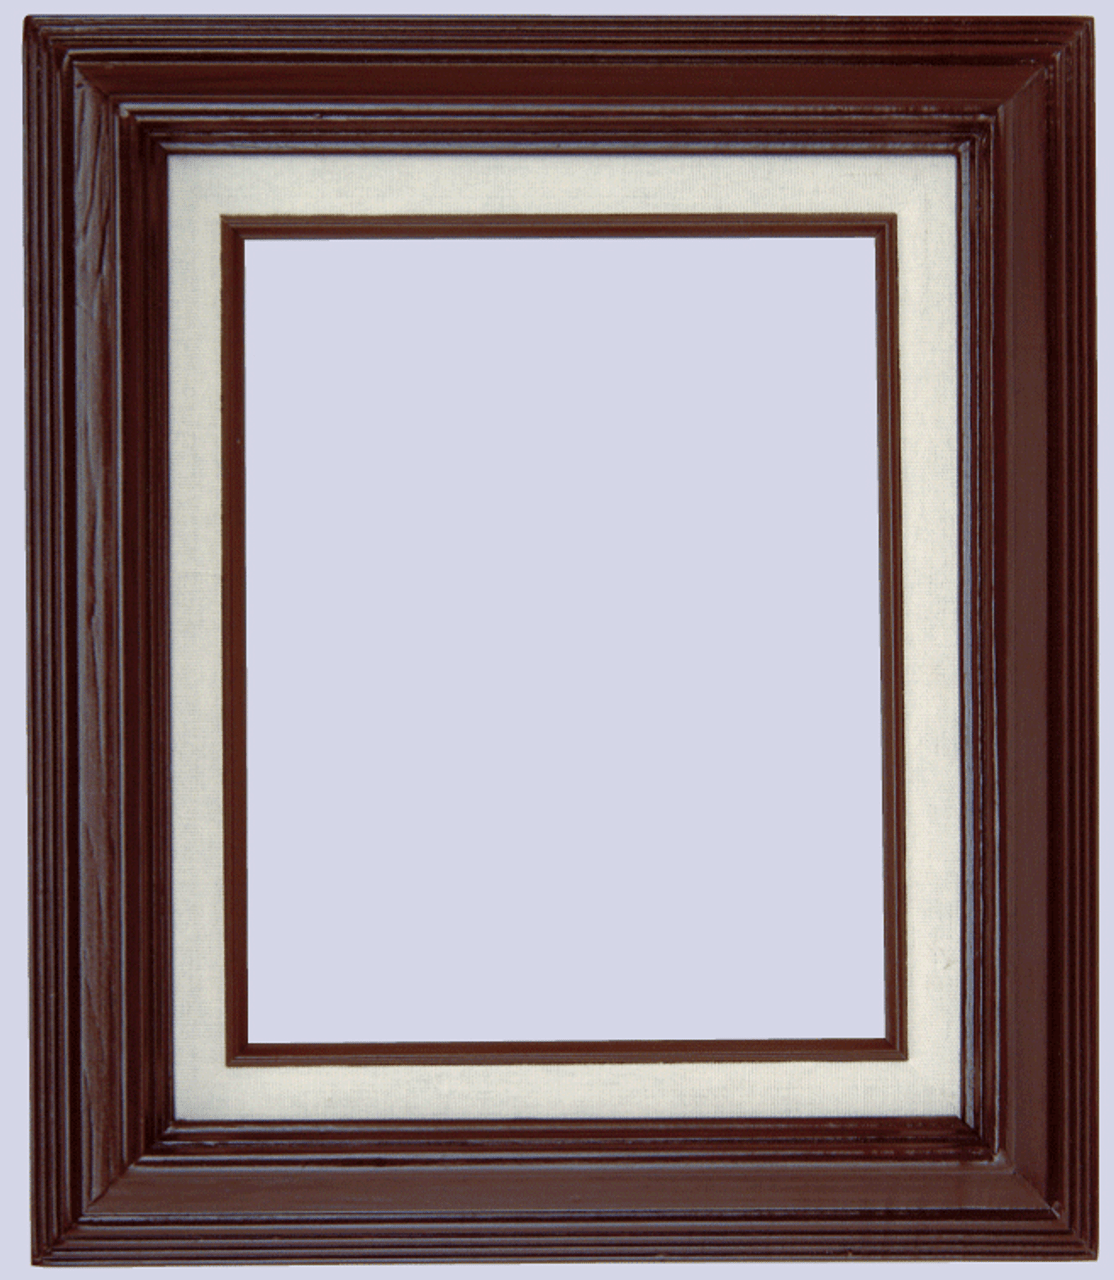  3 Inch Econo Wood Frames With Linen Liners: 24X24*